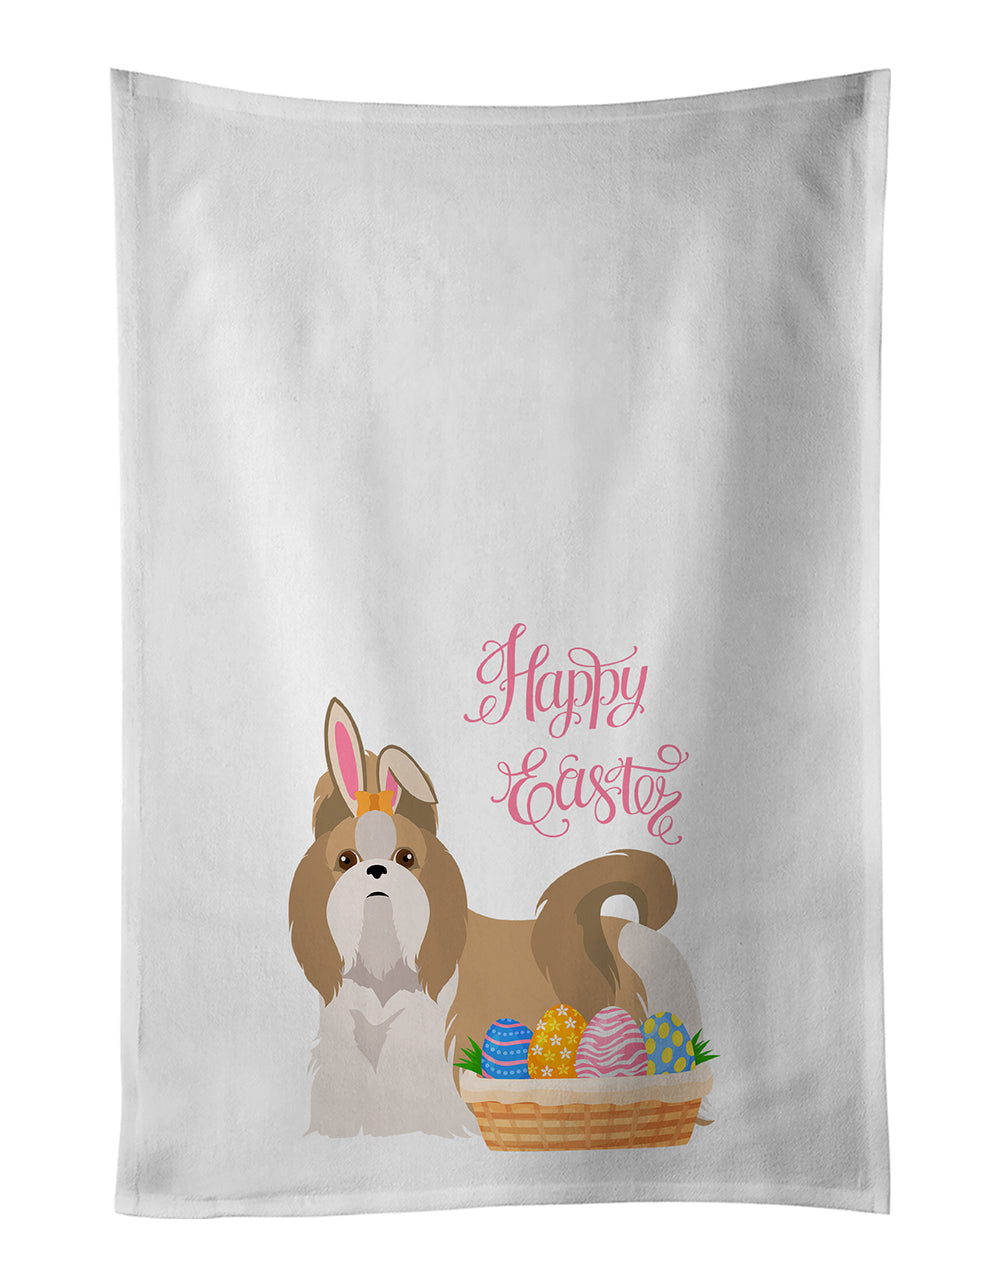 Buy this Gold and White Shih Tzu Easter White Kitchen Towel Set of 2 Dish Towels